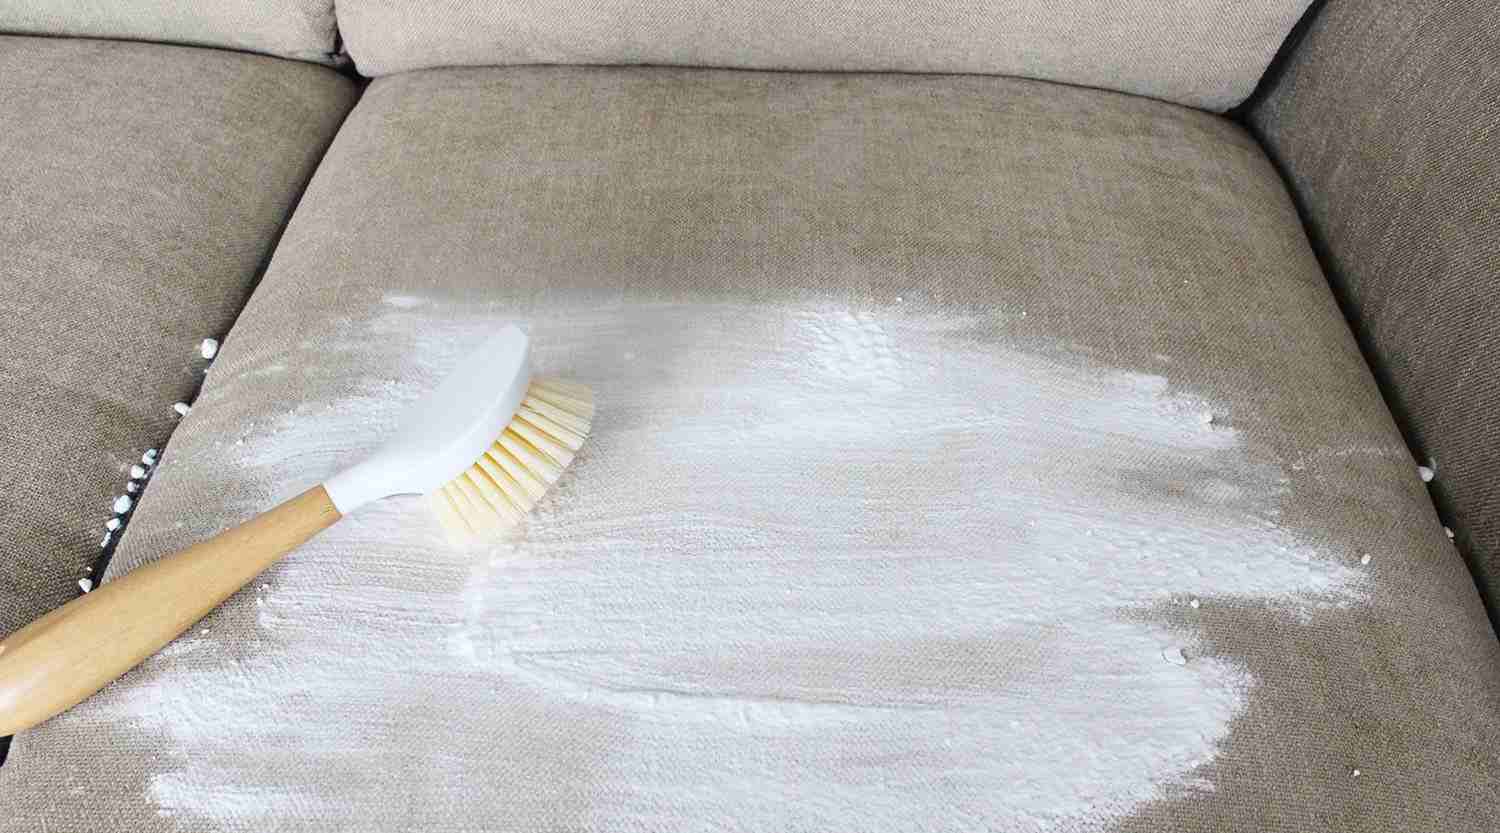 product to clean sofa fabric